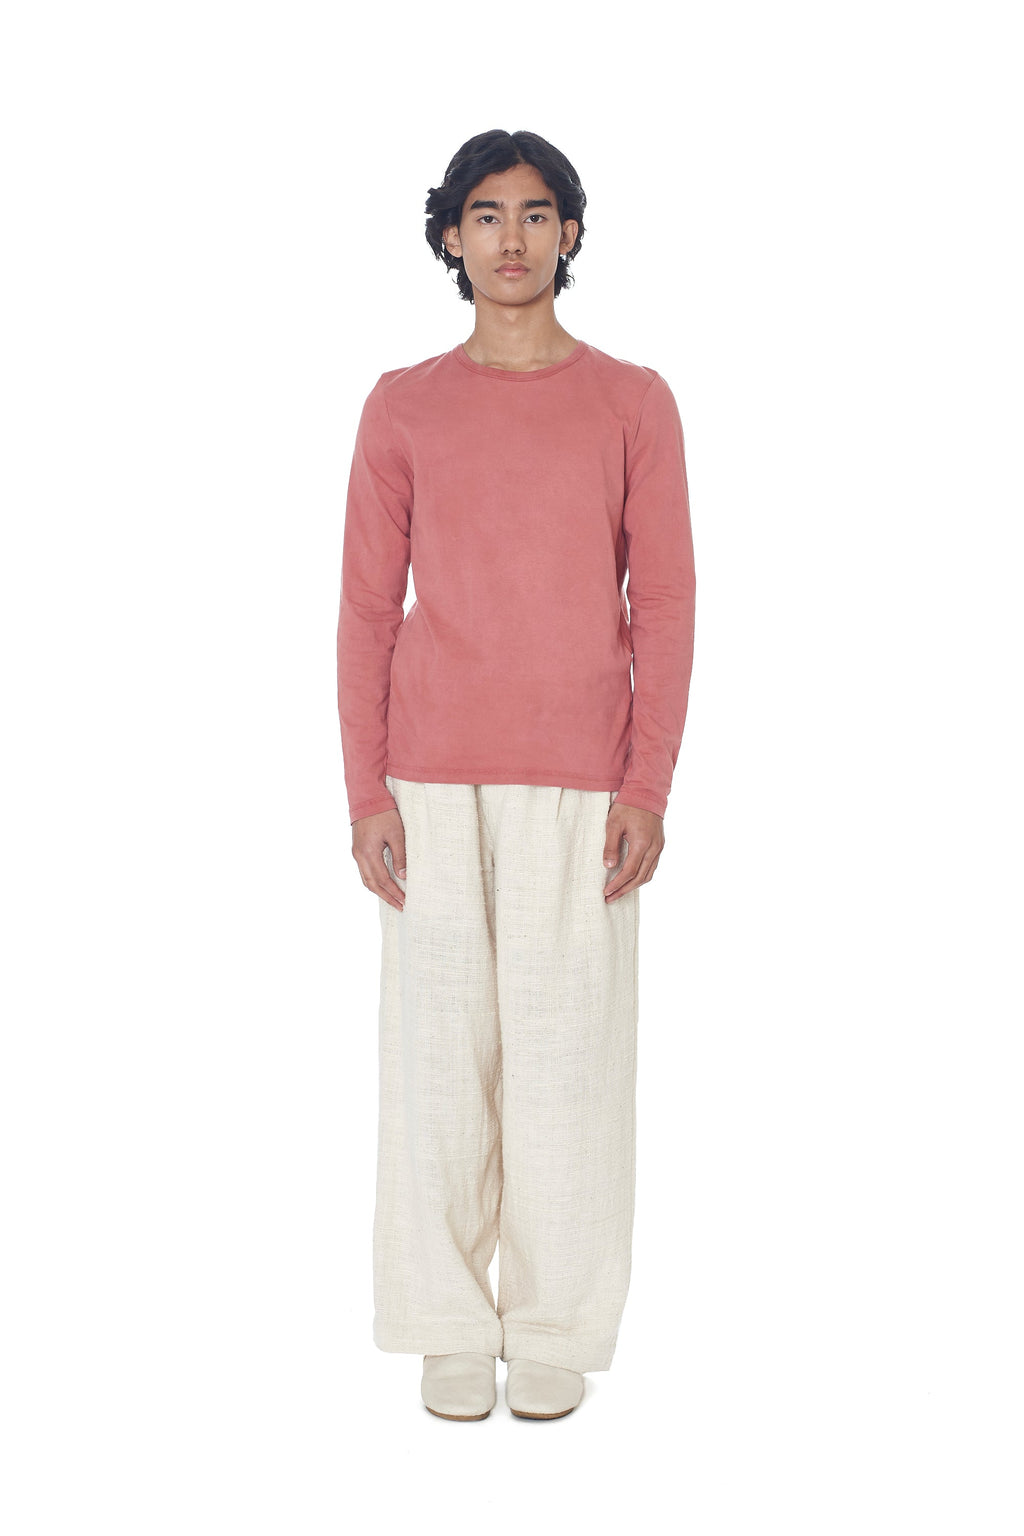 Off-White Block Printed Textured Cotton Drawstring Pant – 11.11/eleven  eleven